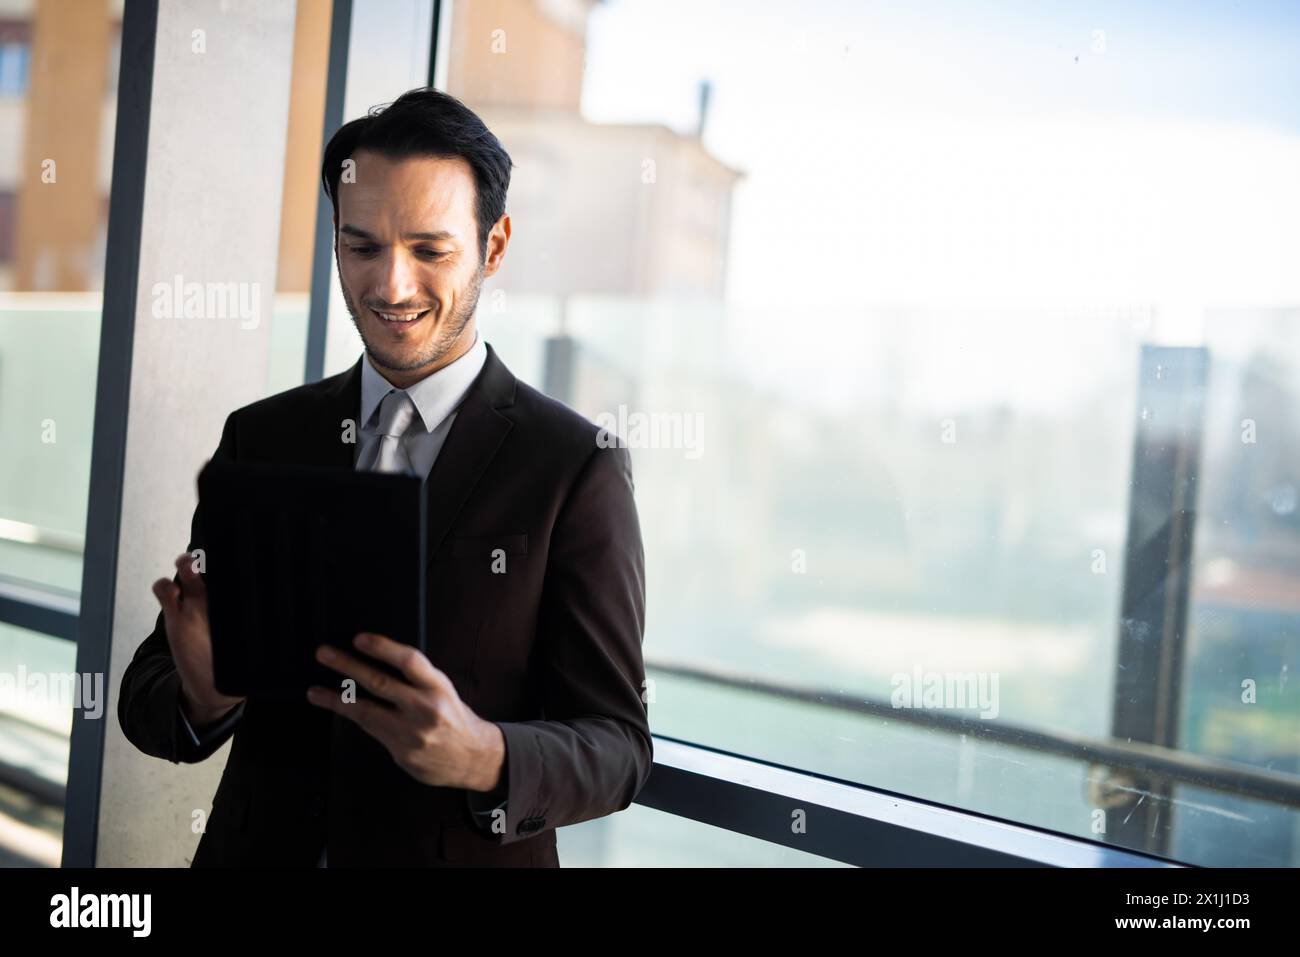 Professional male in suit engages with technology by a window with natural light Stock Photo